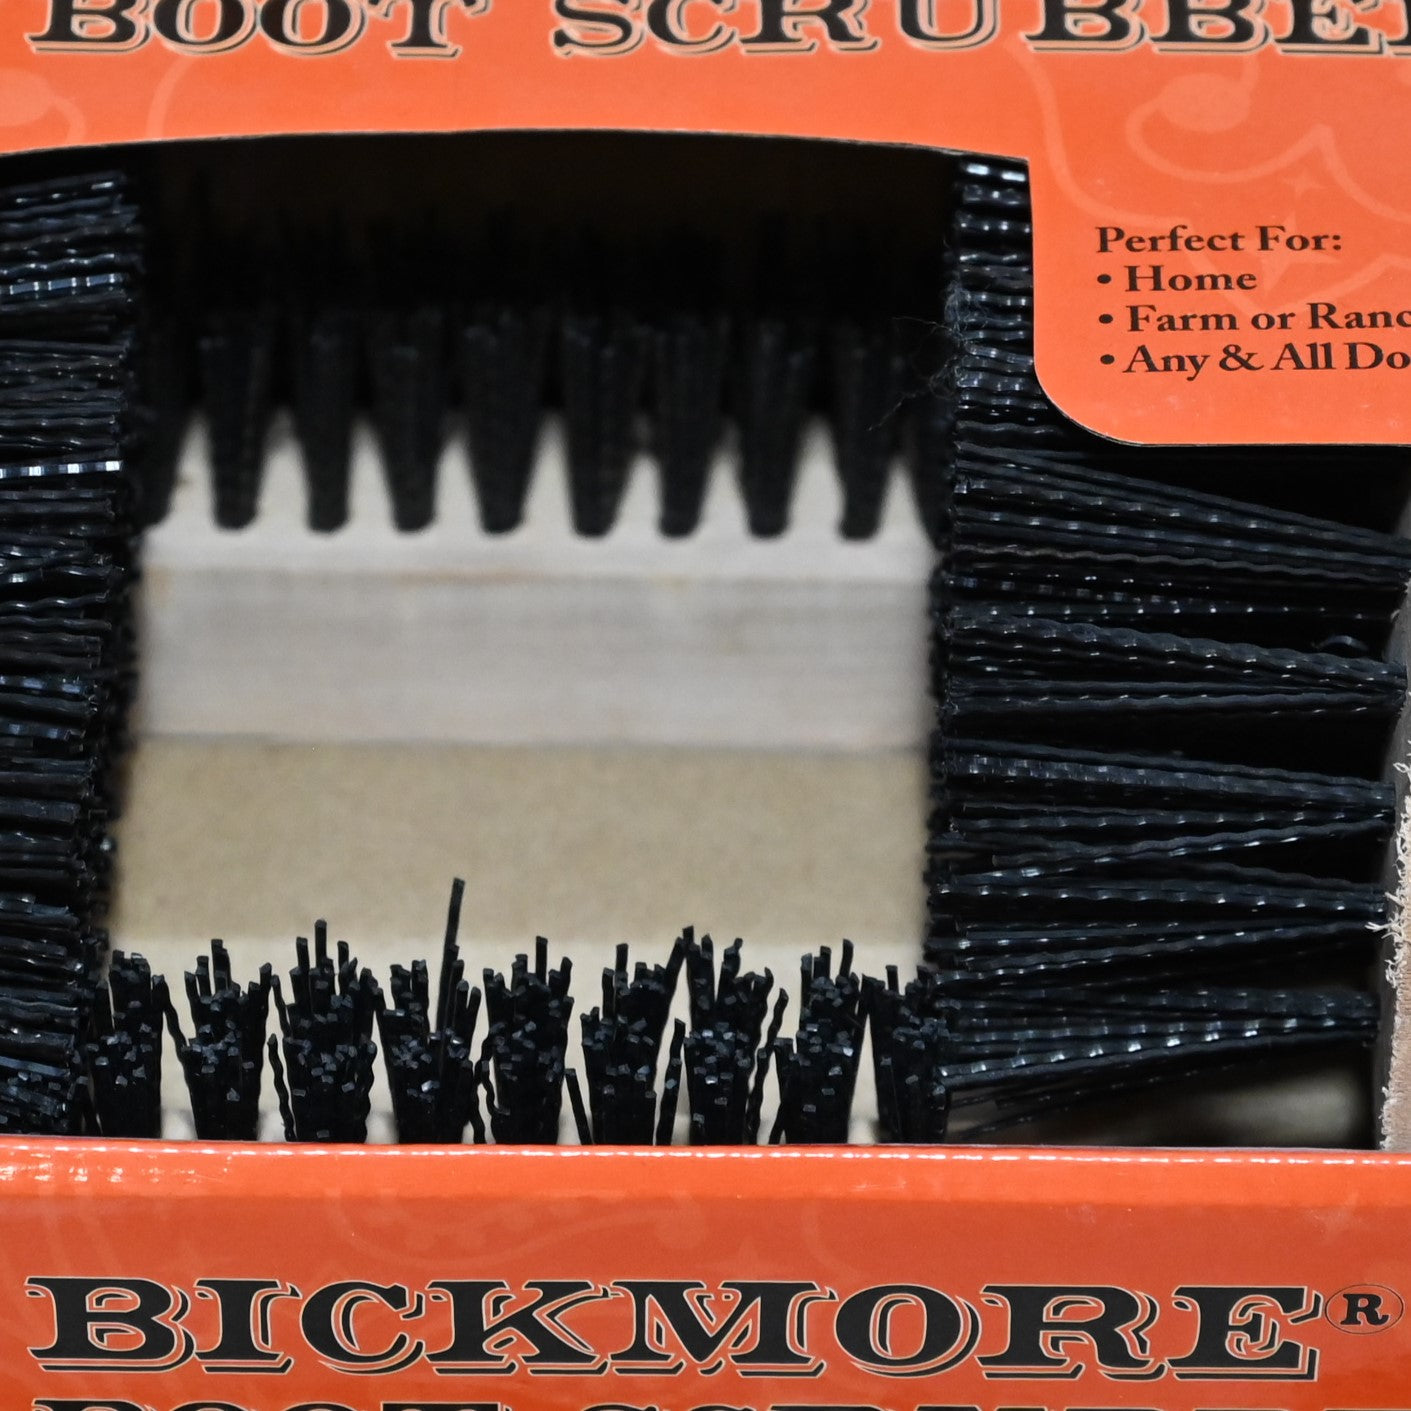 Bickmore Boot/Shoe Scrubber And Dirt Remover view of detail